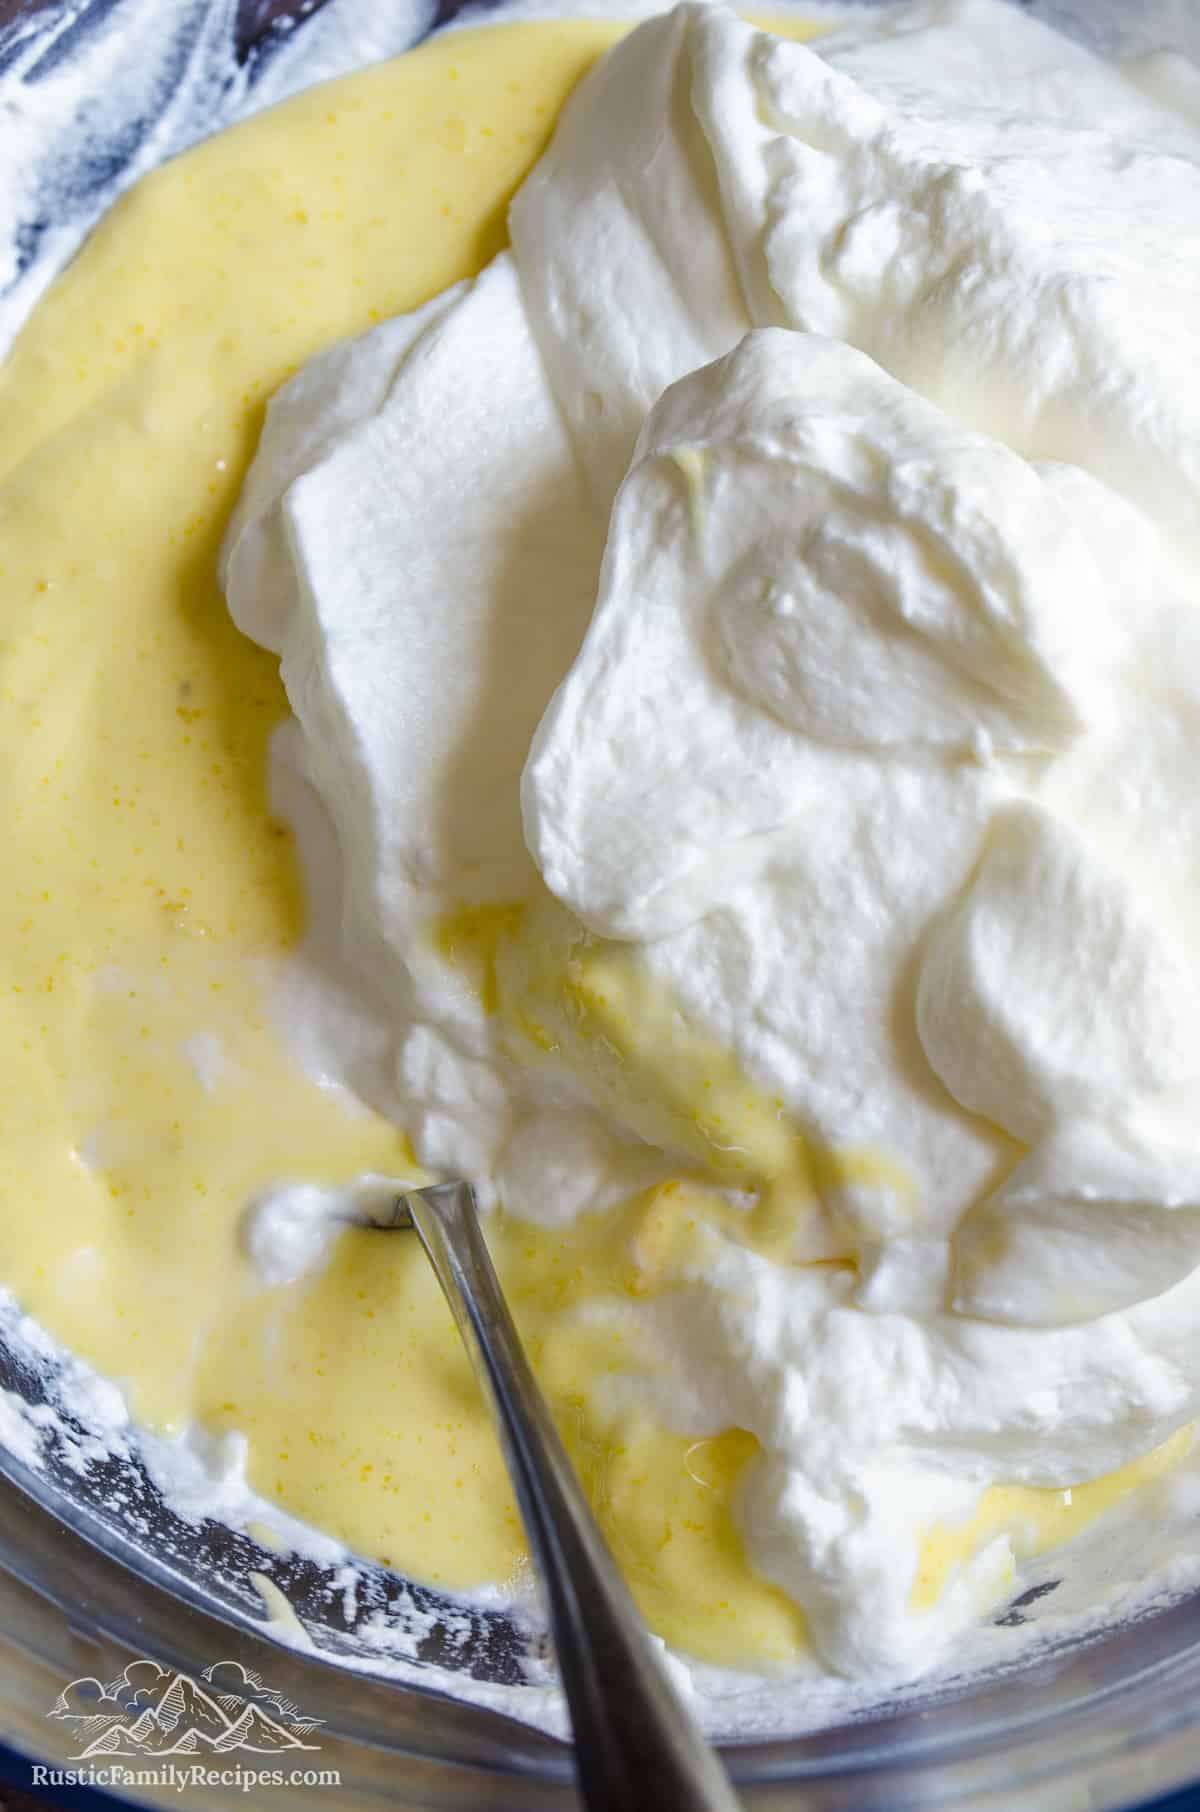 Chilled whipped cream is folded into the lemon semifreddo mixture.